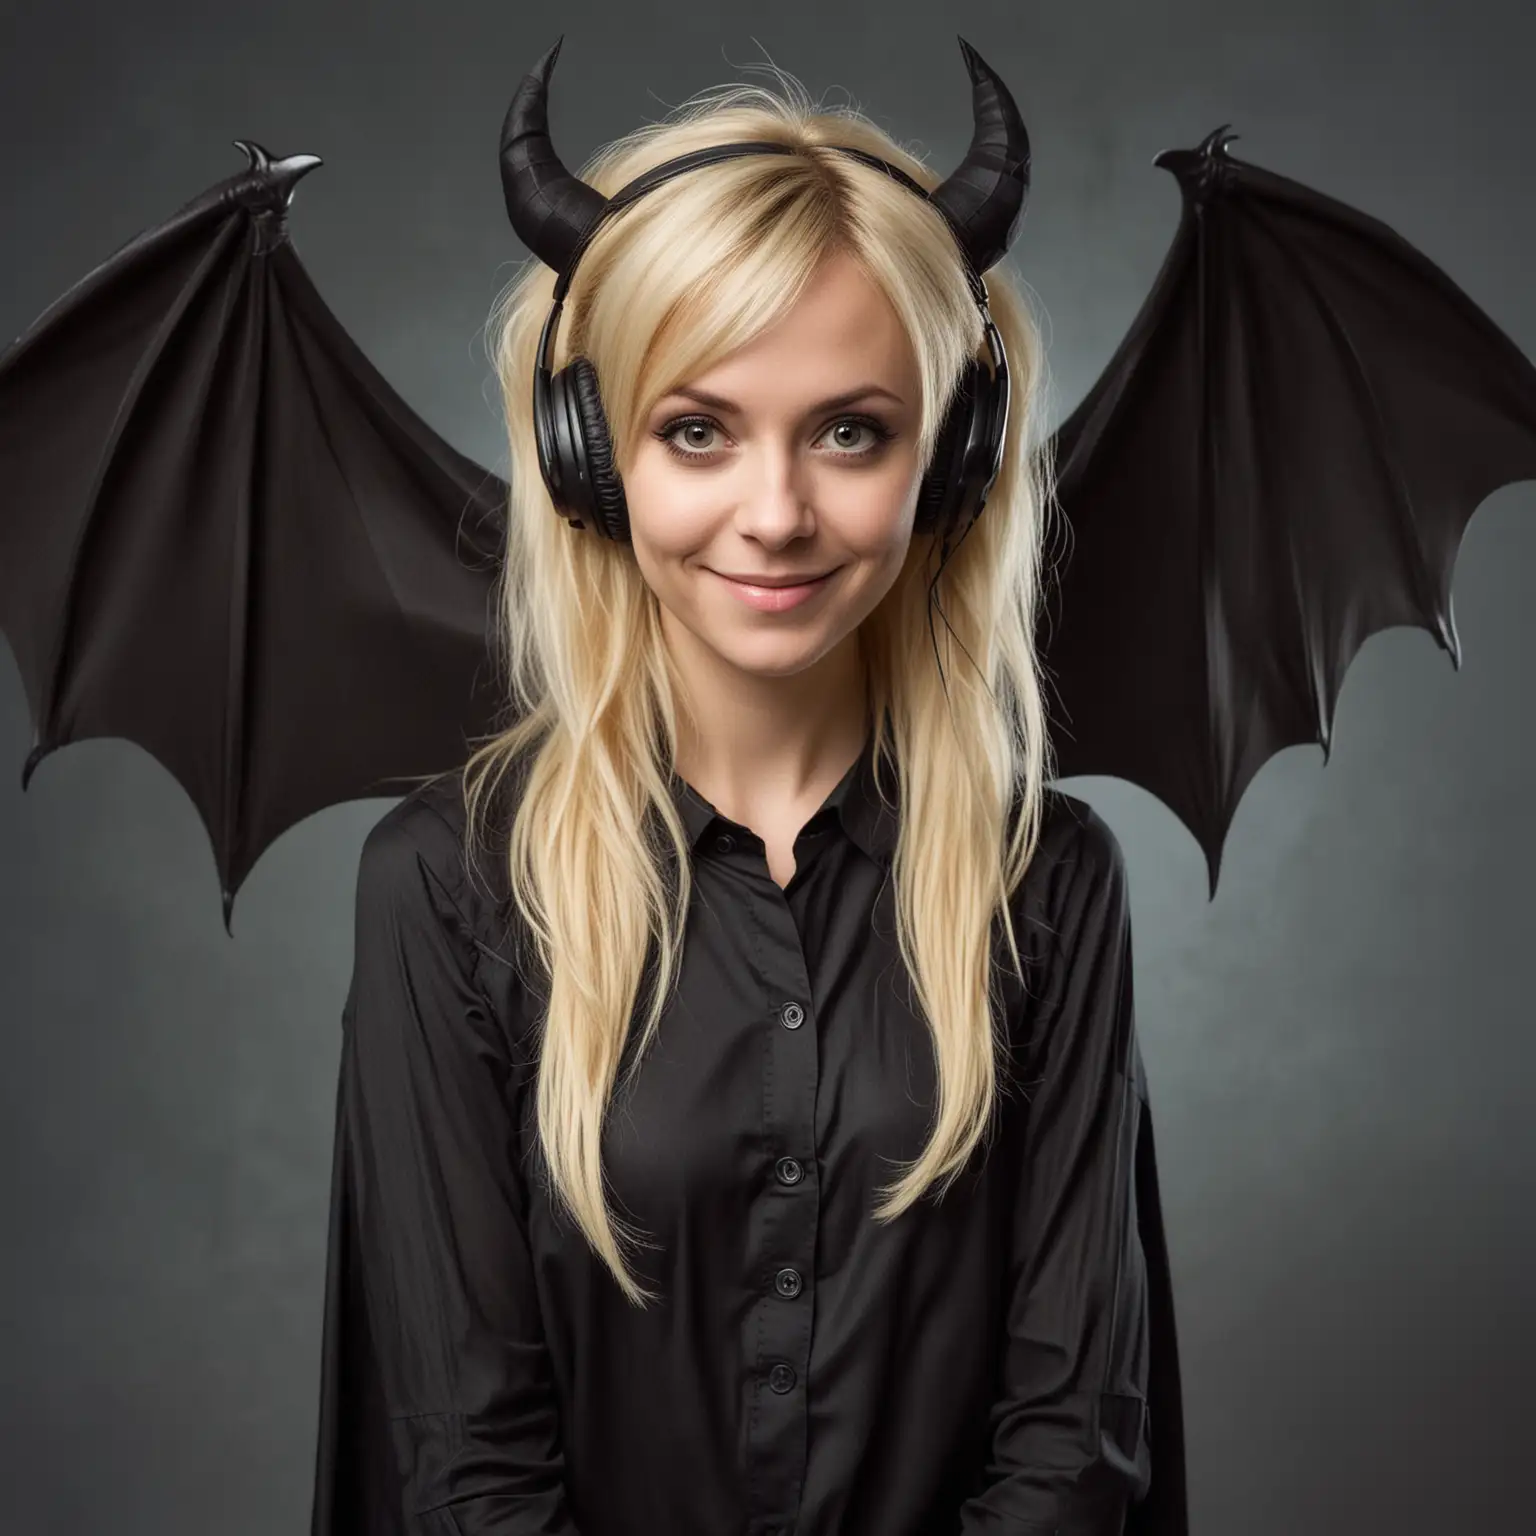 A 45 year old, blonde Icelandic, nerdy, petite emo woman, with horns on her head, big bat wings wrapped around her, pointed tail, who dresses modestly. She has a wry smile and some headphones in her hands